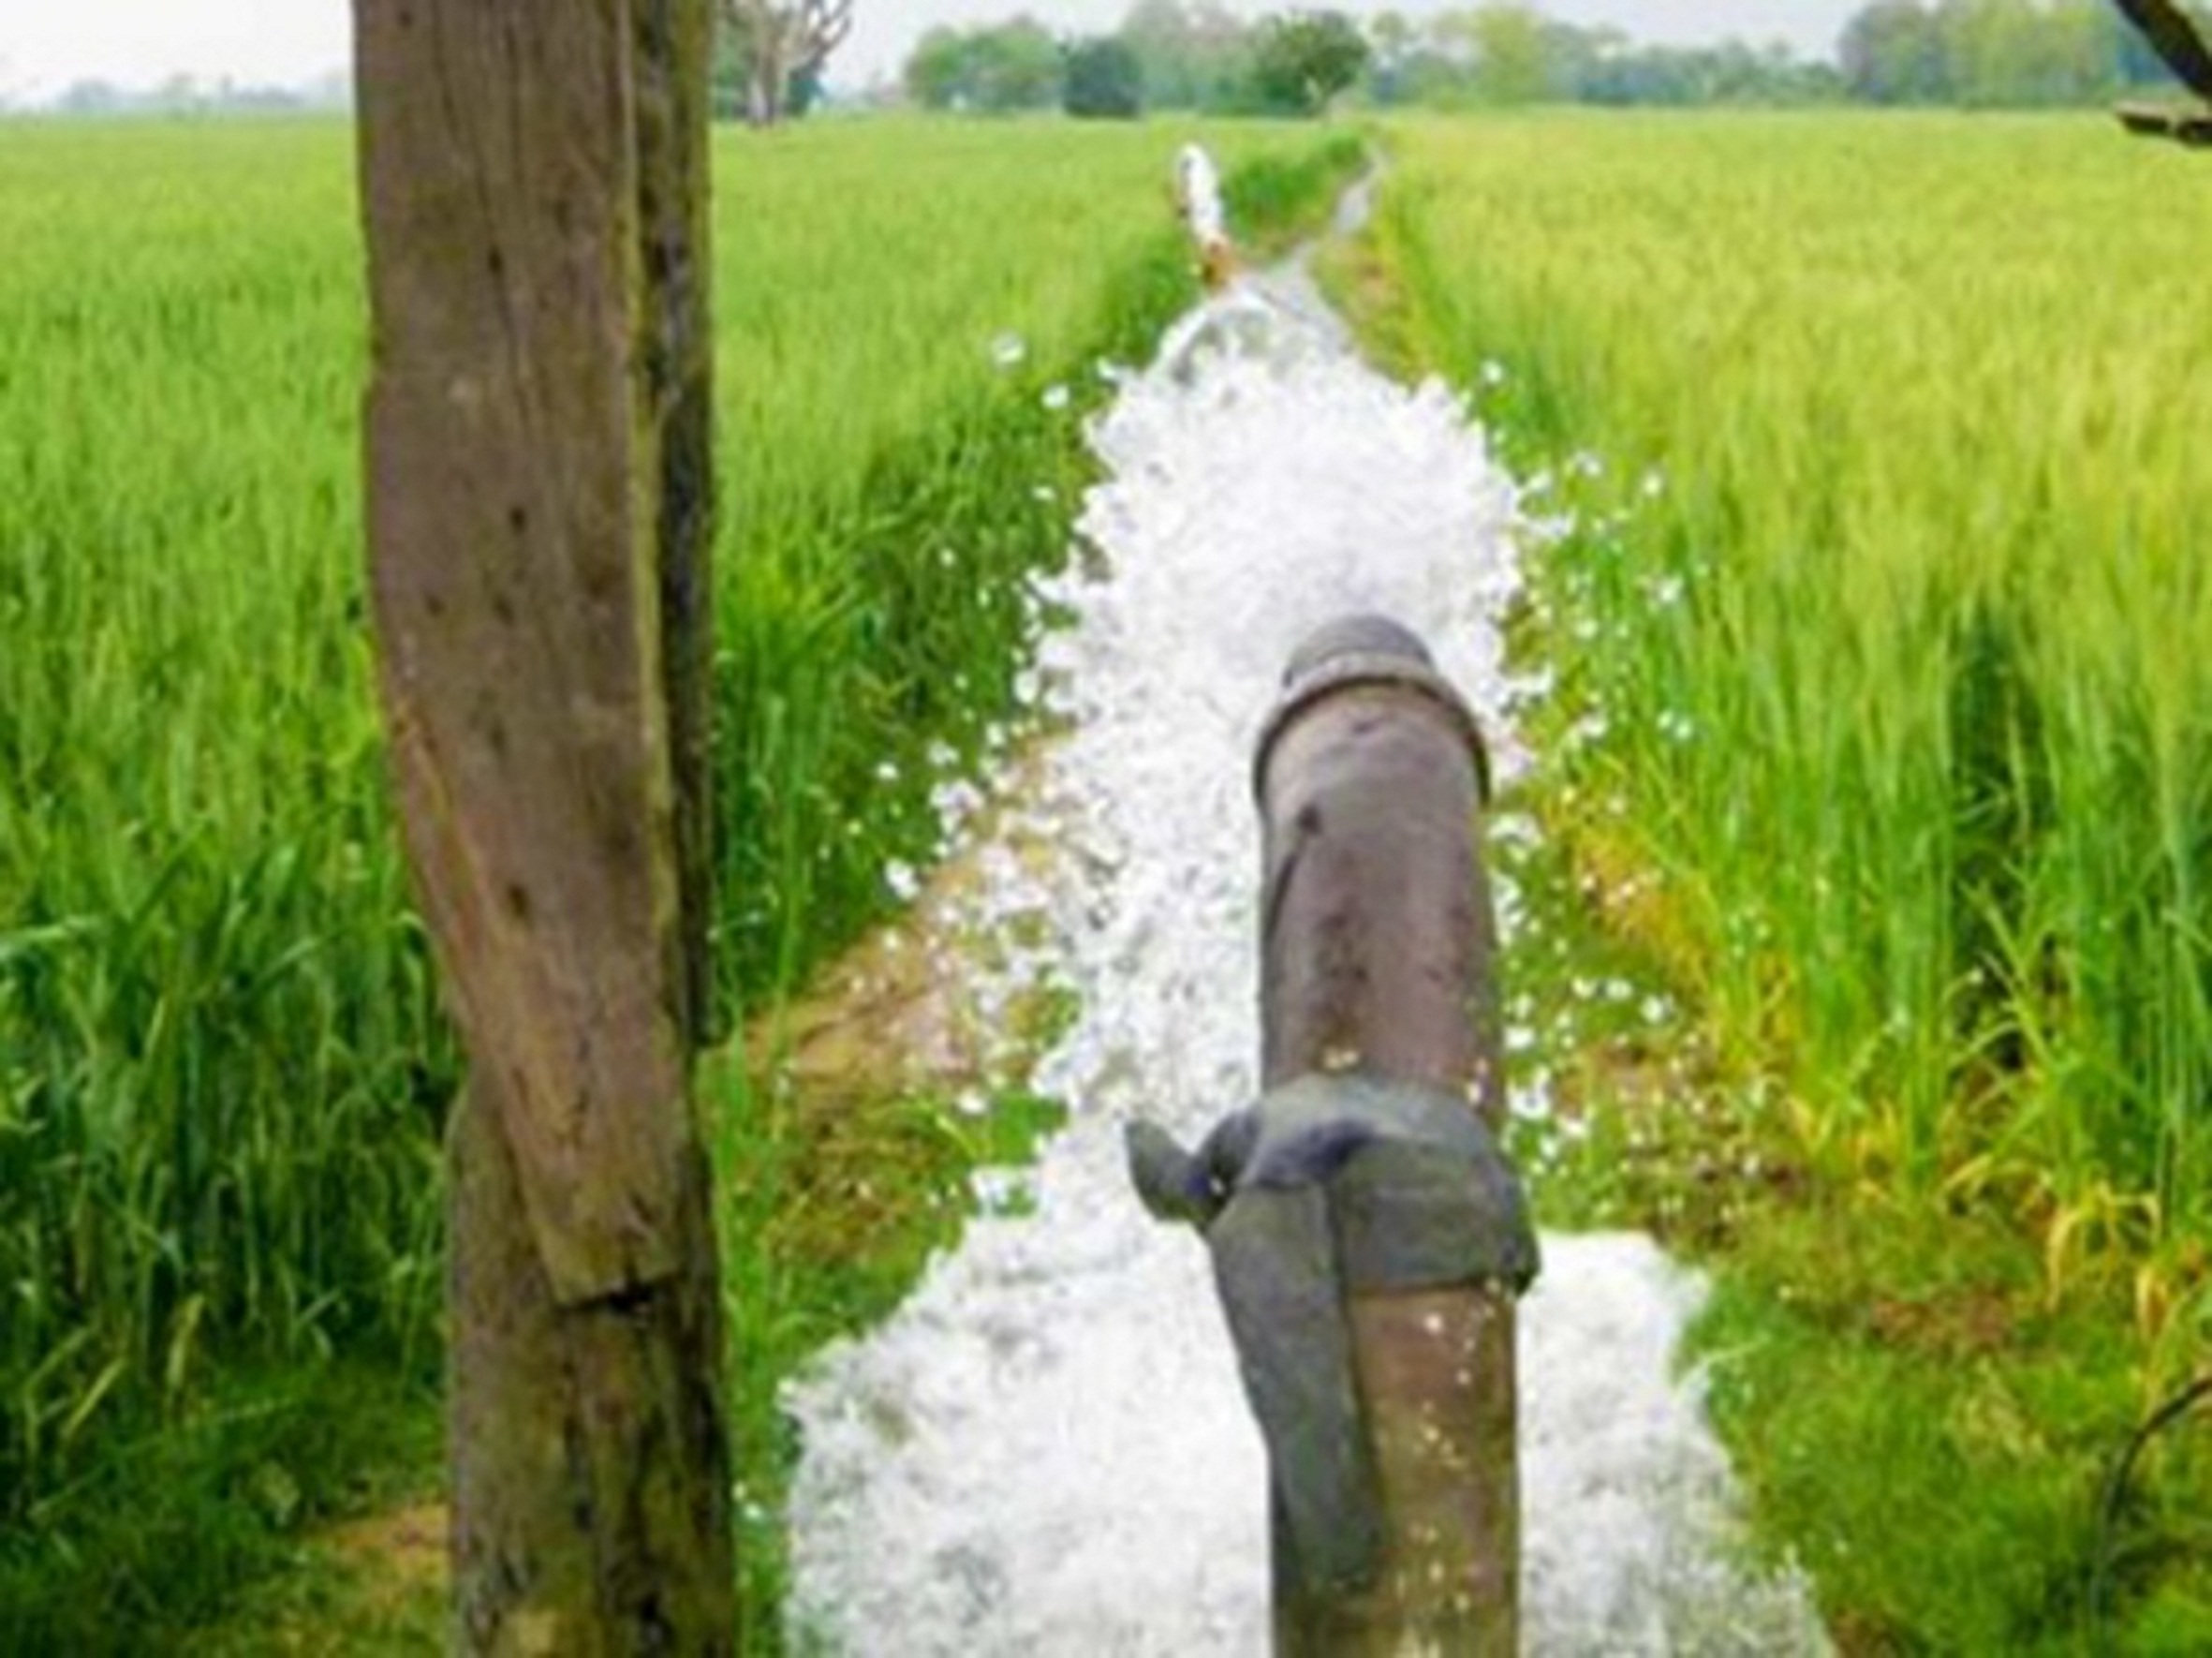 In 49 villages of Beauhari will be irrigation in the fields through pipeline